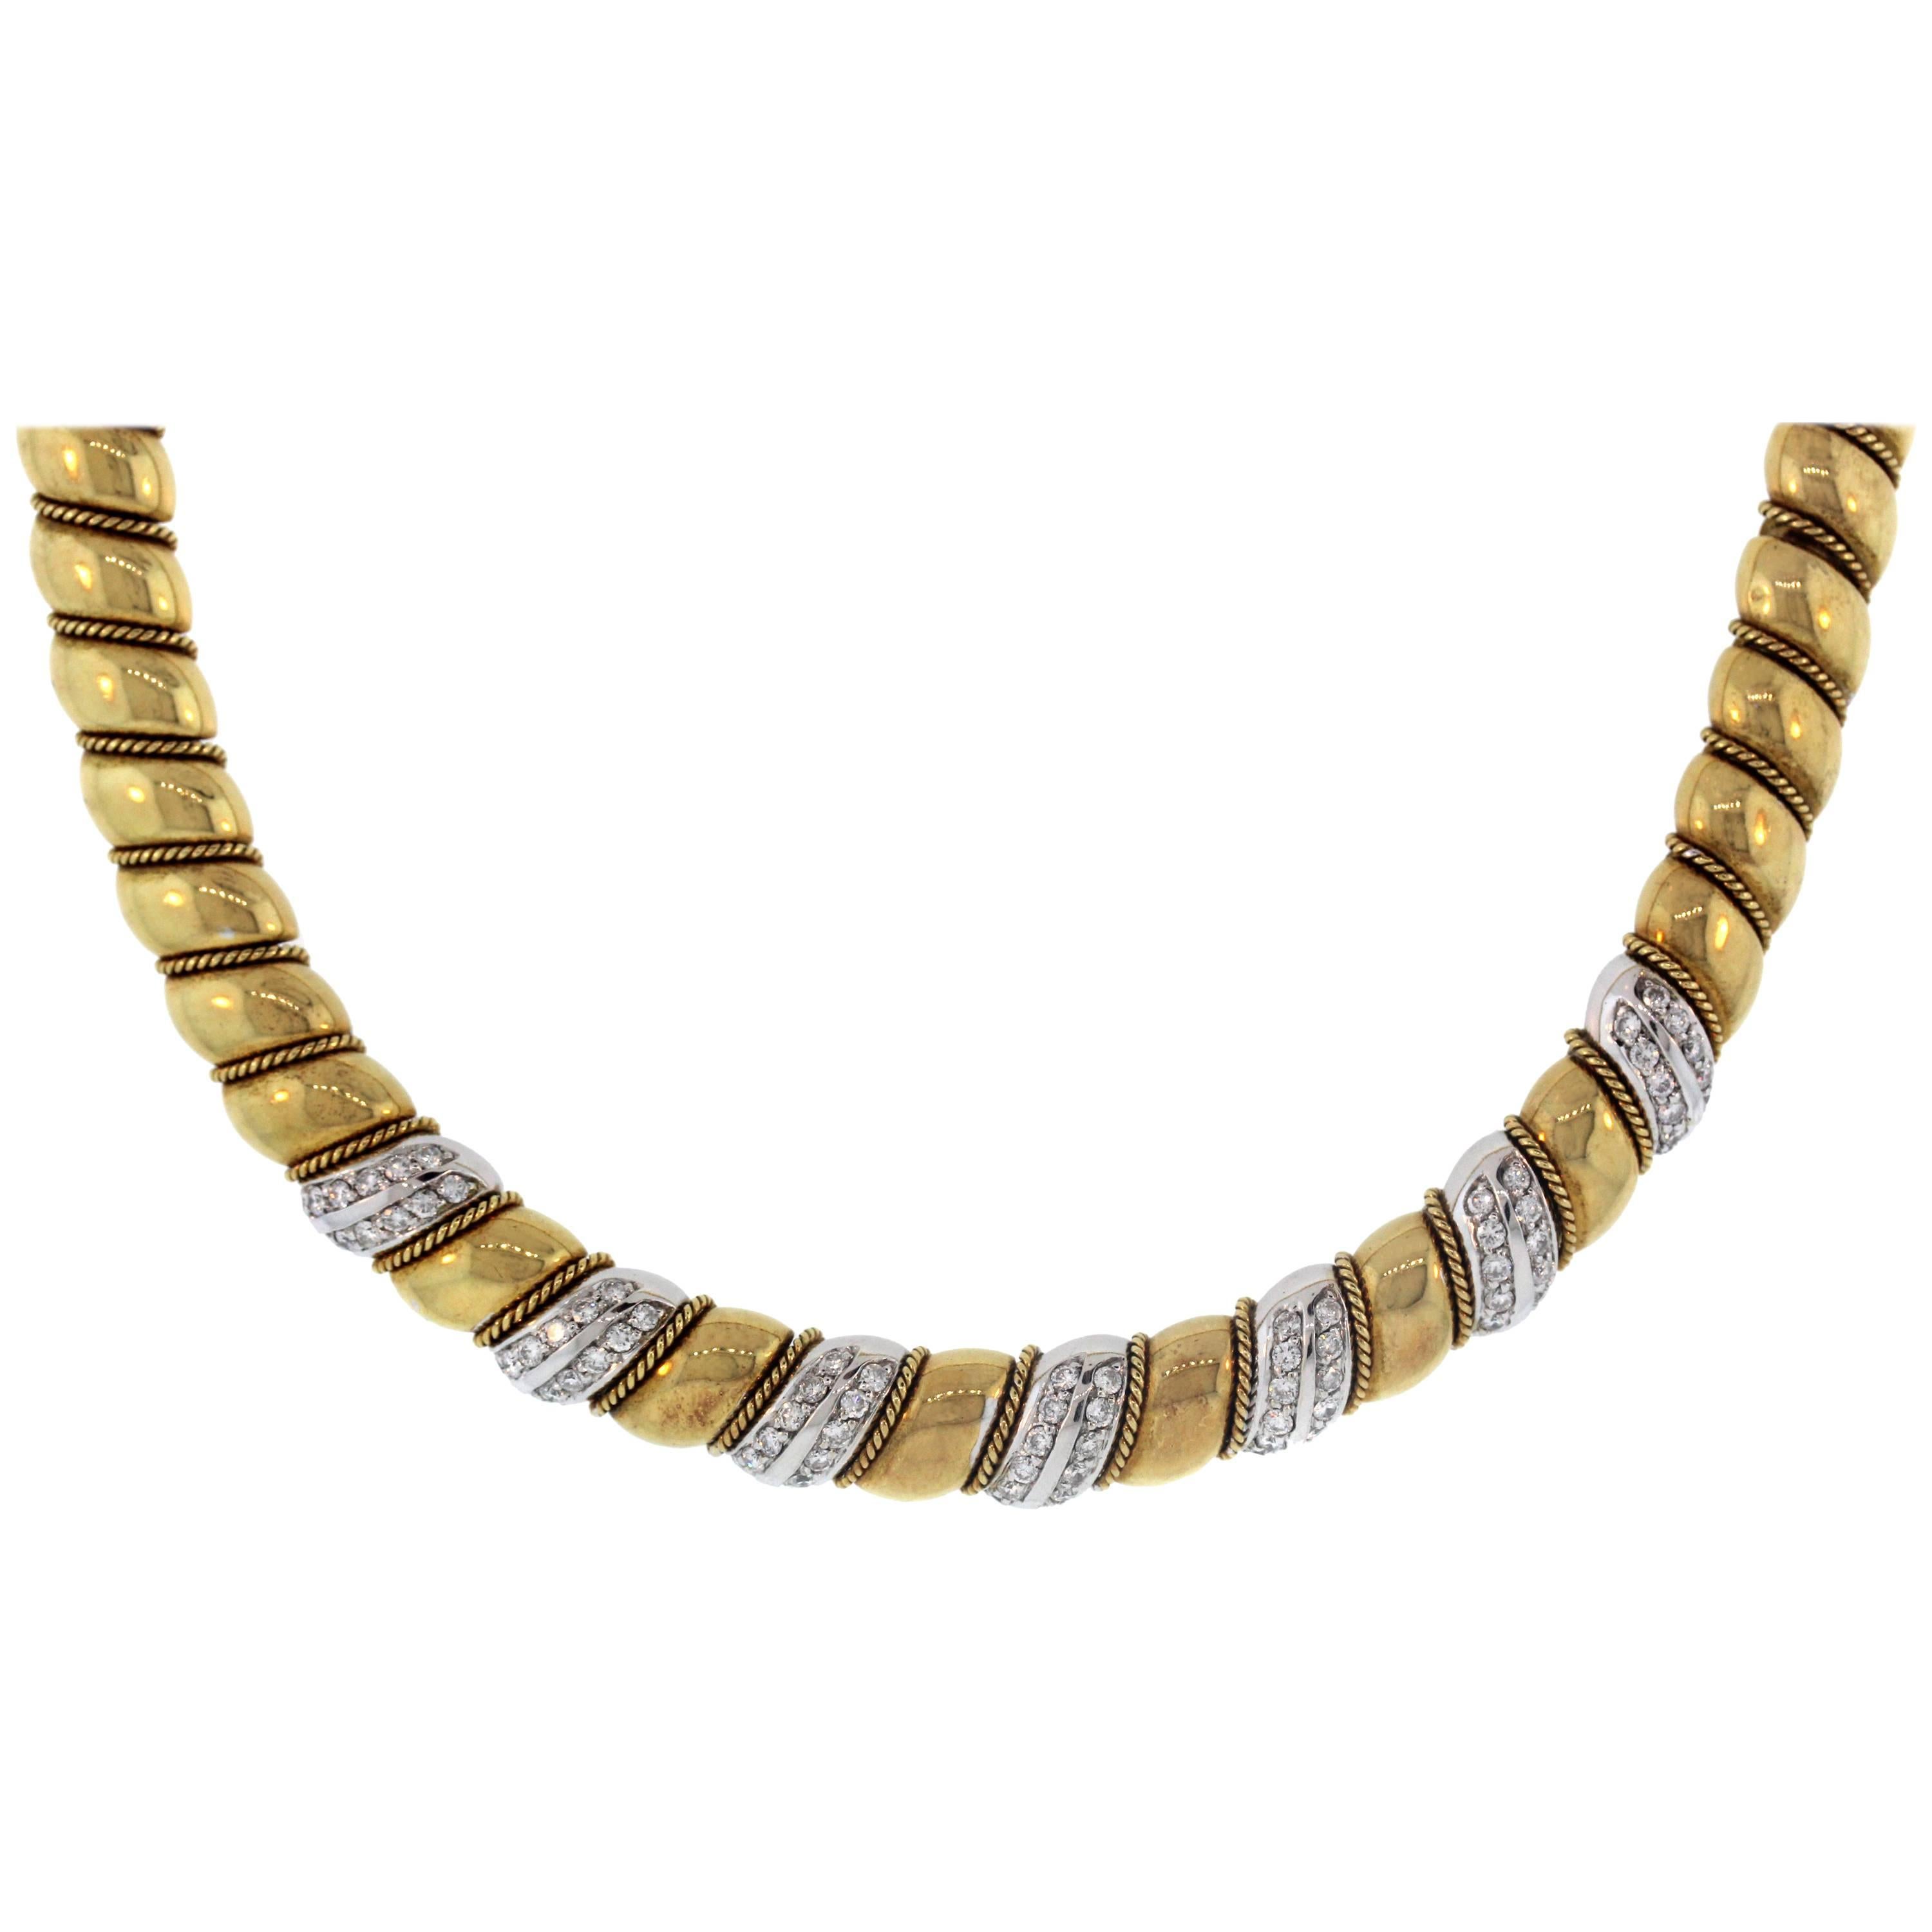 Sabbadini 18K Two Tone Yellow White Gold and Diamond Choker Style Necklace
Gorgeous craftsmanship and detail seen throughout piece. 

2.50 carat Diamonds G Color, VS Clarity

Necklace is 16 inches in length.

Signed Sabbadini, Italy